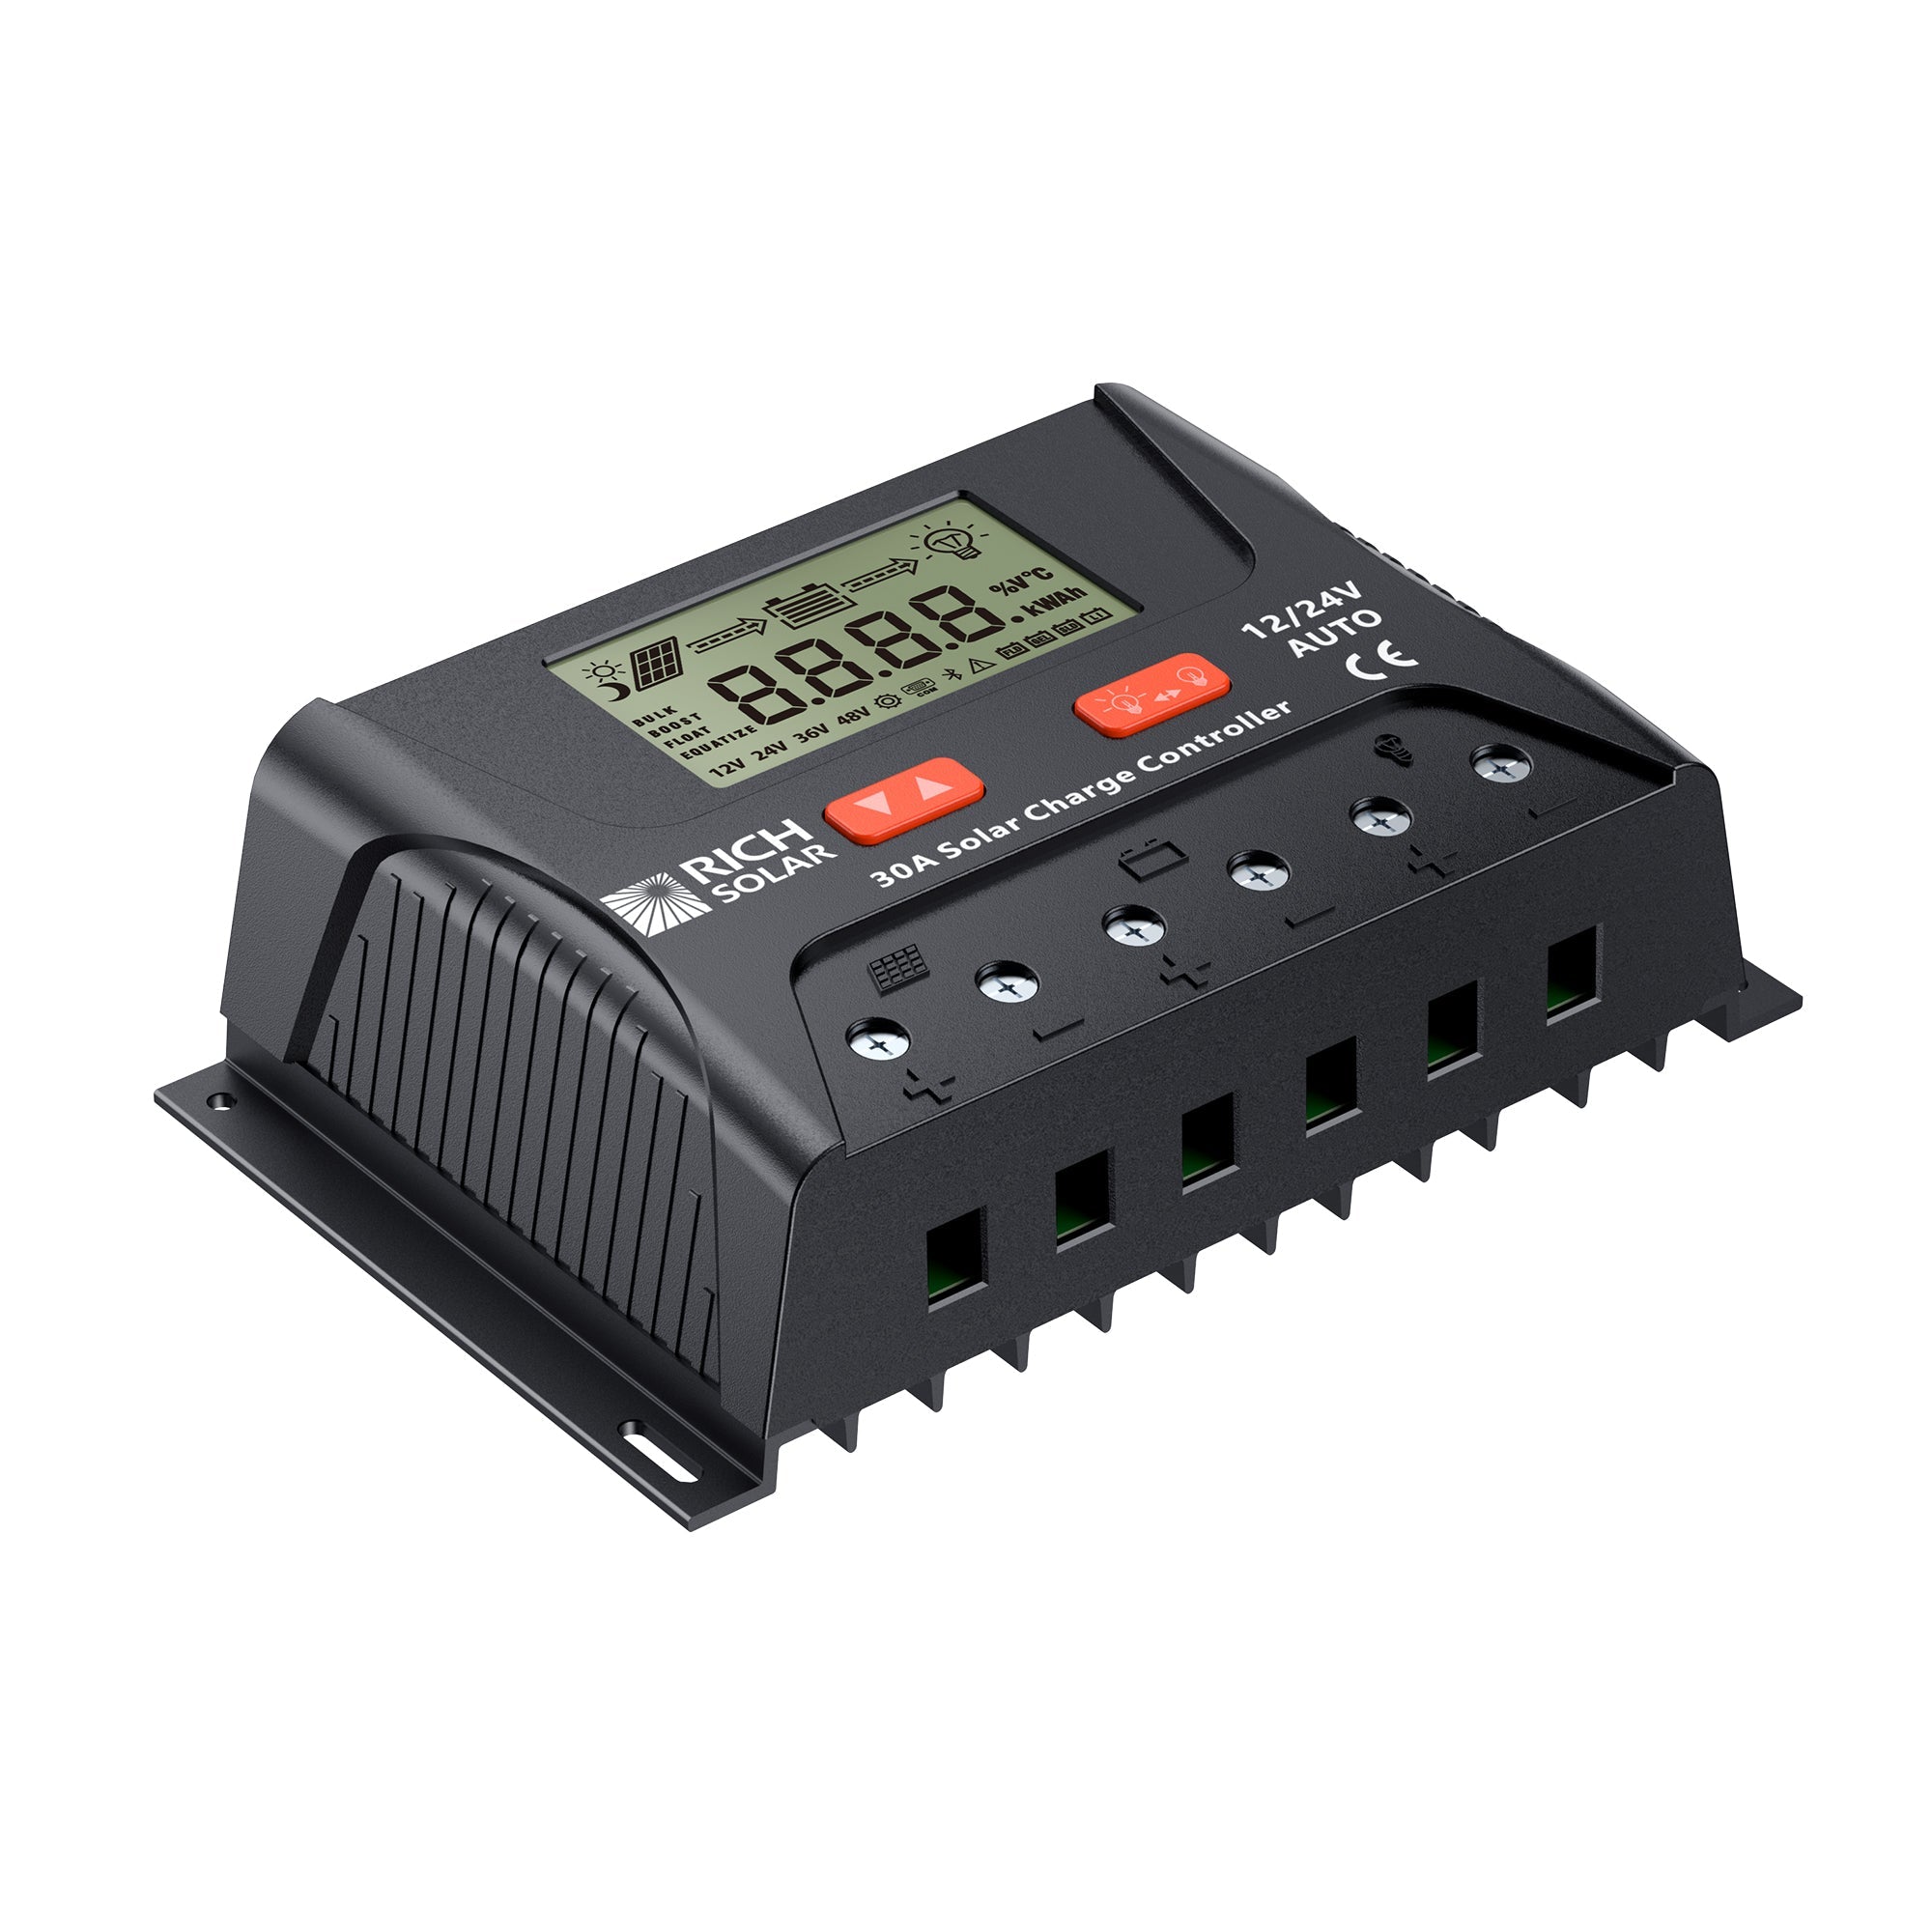 RICH SOLAR 30 Amp PWM Solar Charge Controller - Solar Generators and Power Stations Plus